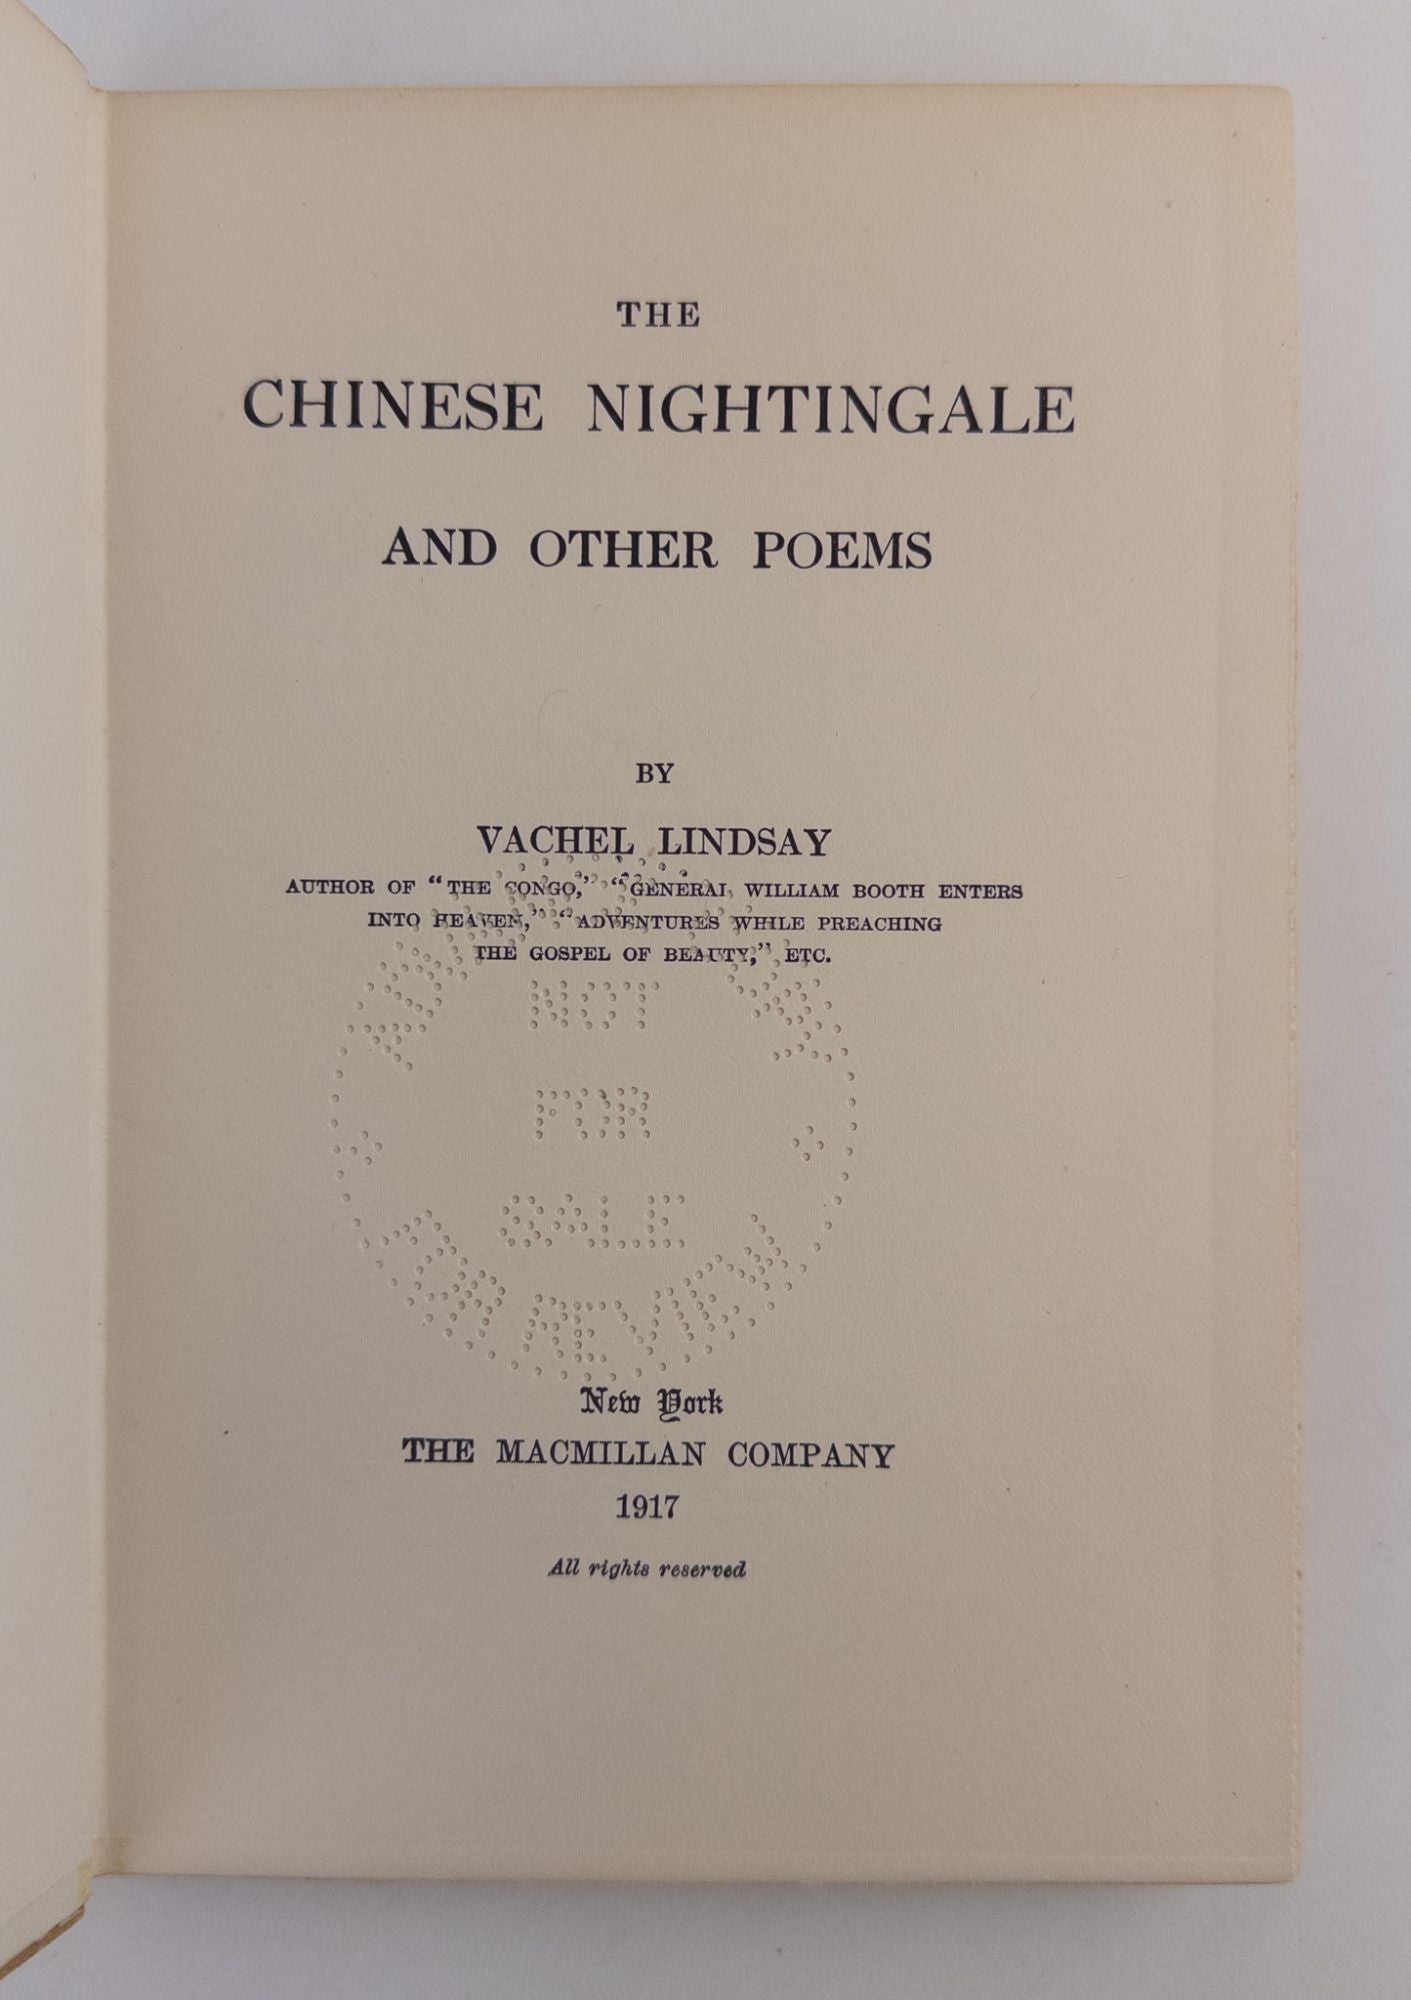 Product Image for THE CHINESE NIGHTINGALE